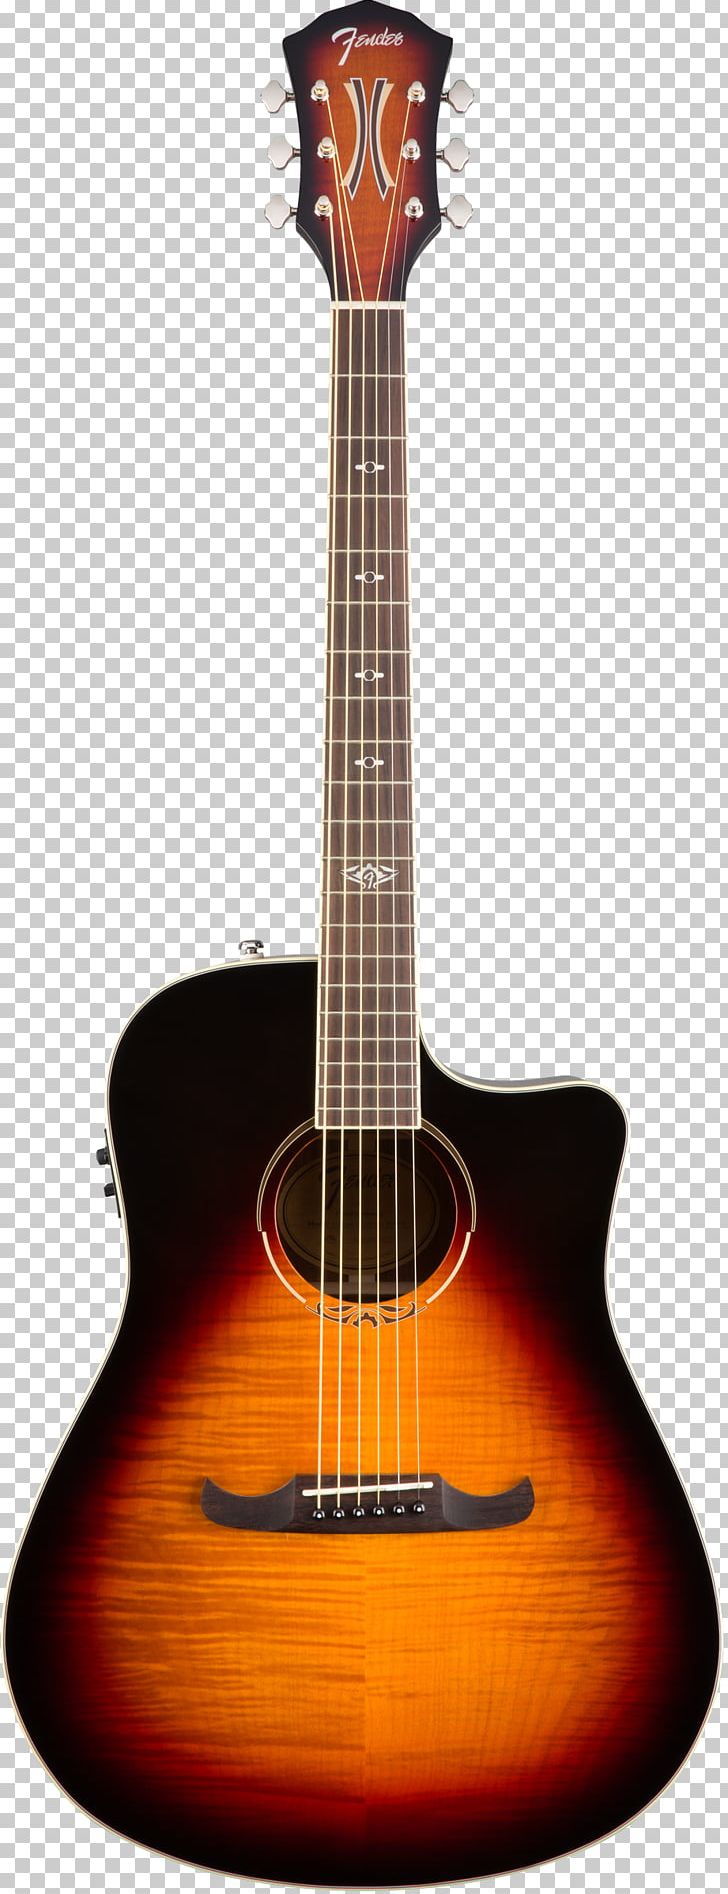 Fender T-Bucket 300 CE Acoustic-Electric Guitar Acoustic Guitar Sunburst PNG, Clipart, Acoustic Electric Guitar, Classical Guitar, Cuatro, Cutaway, Guitar Free PNG Download